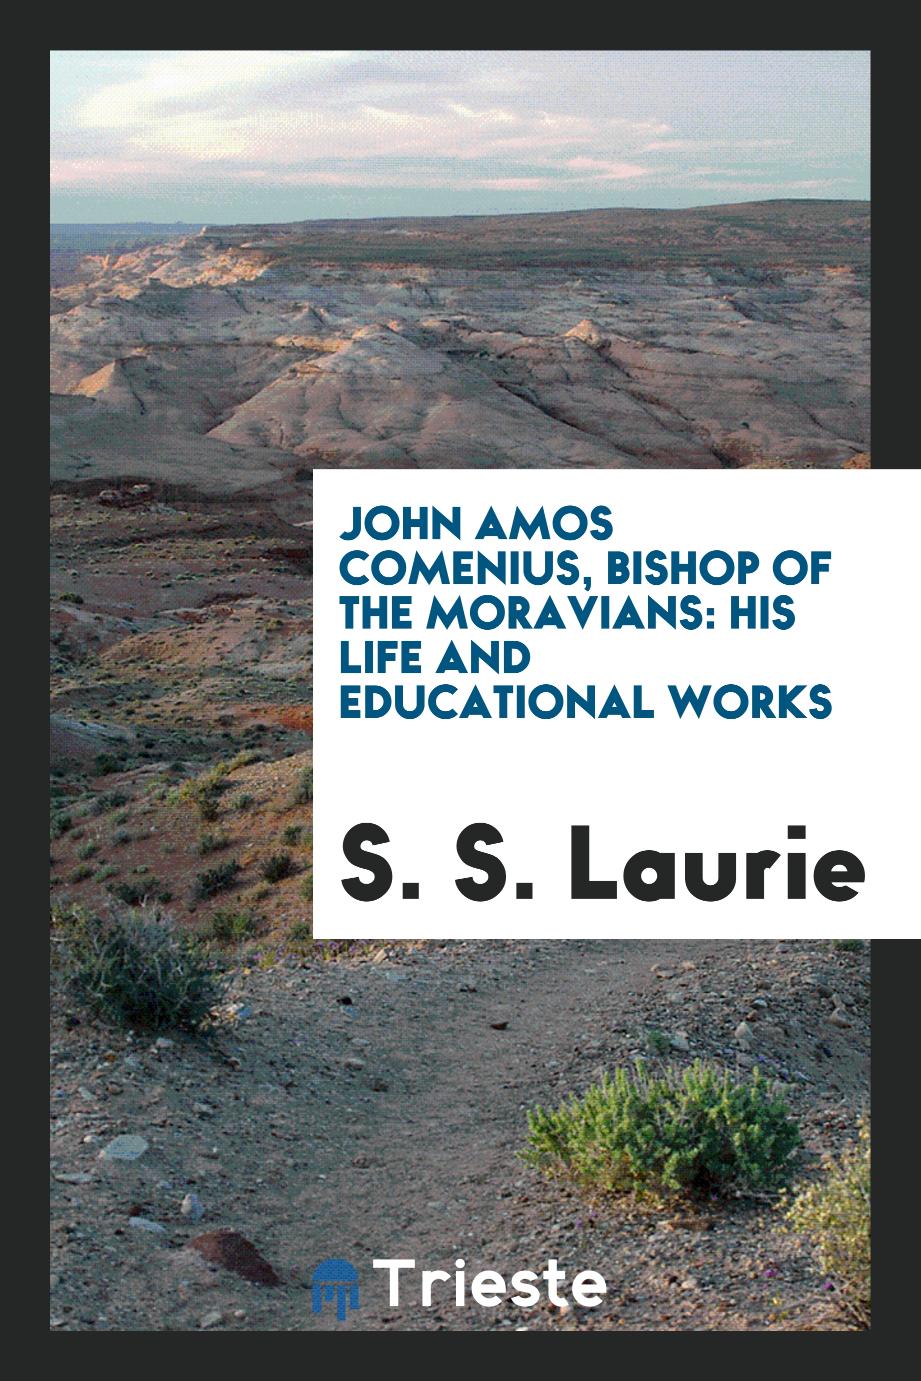 John Amos Comenius, Bishop of the Moravians: his life and educational works